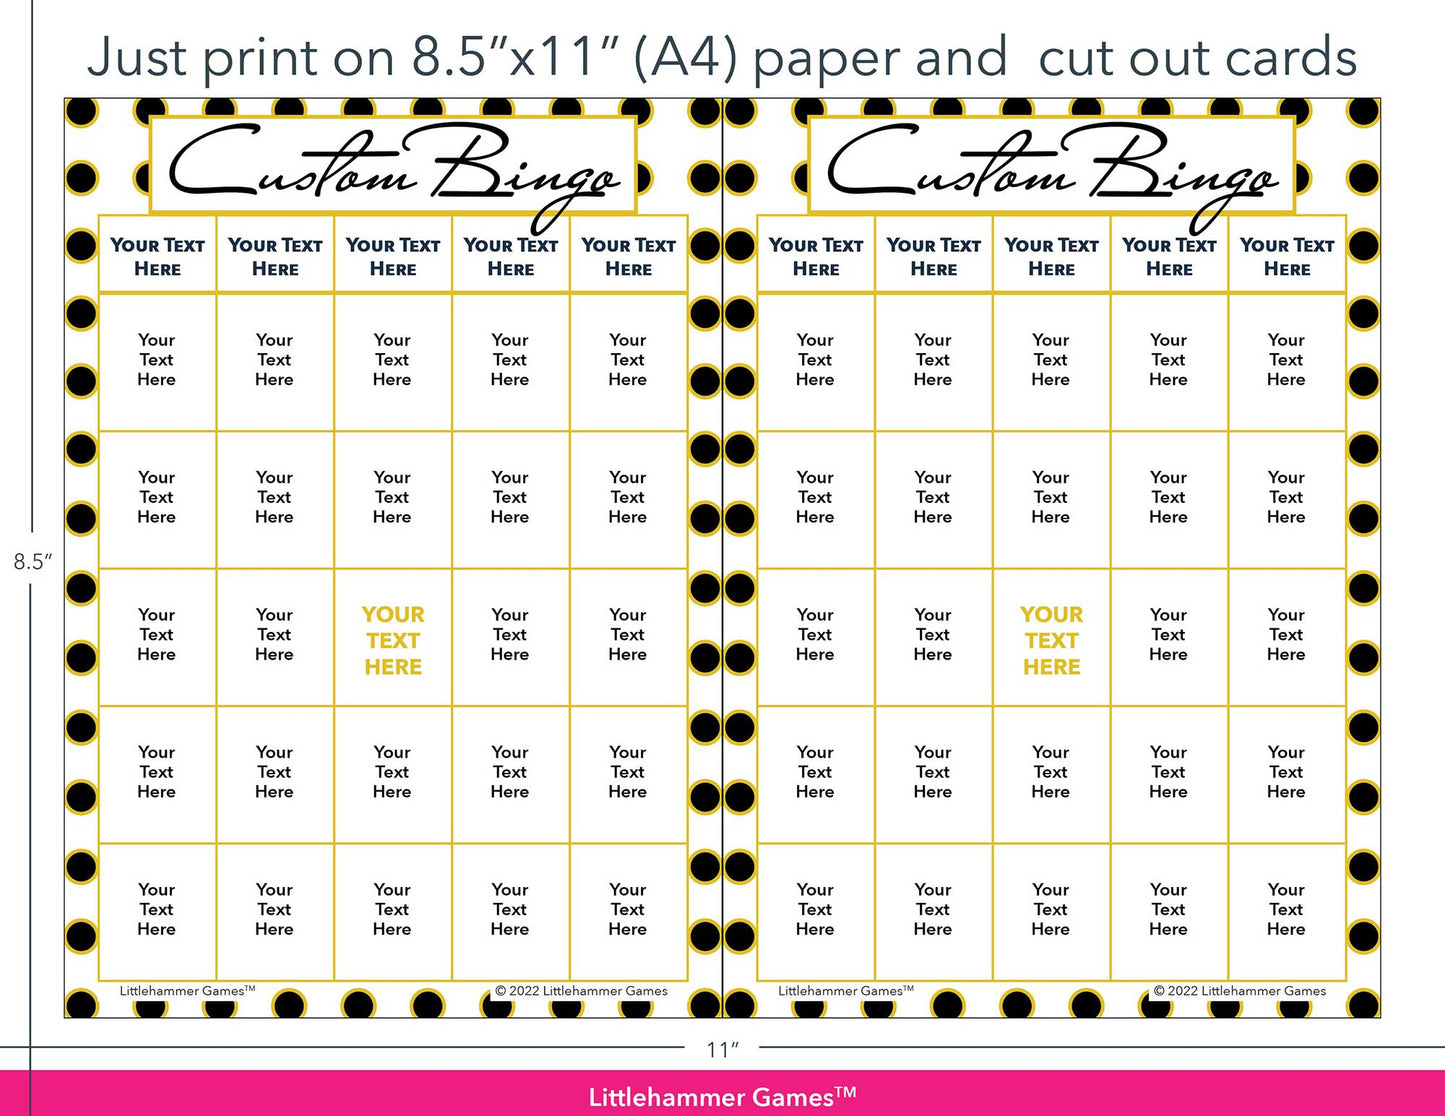 Black and gold polka dot Custom Bingo game cards with printing instructions